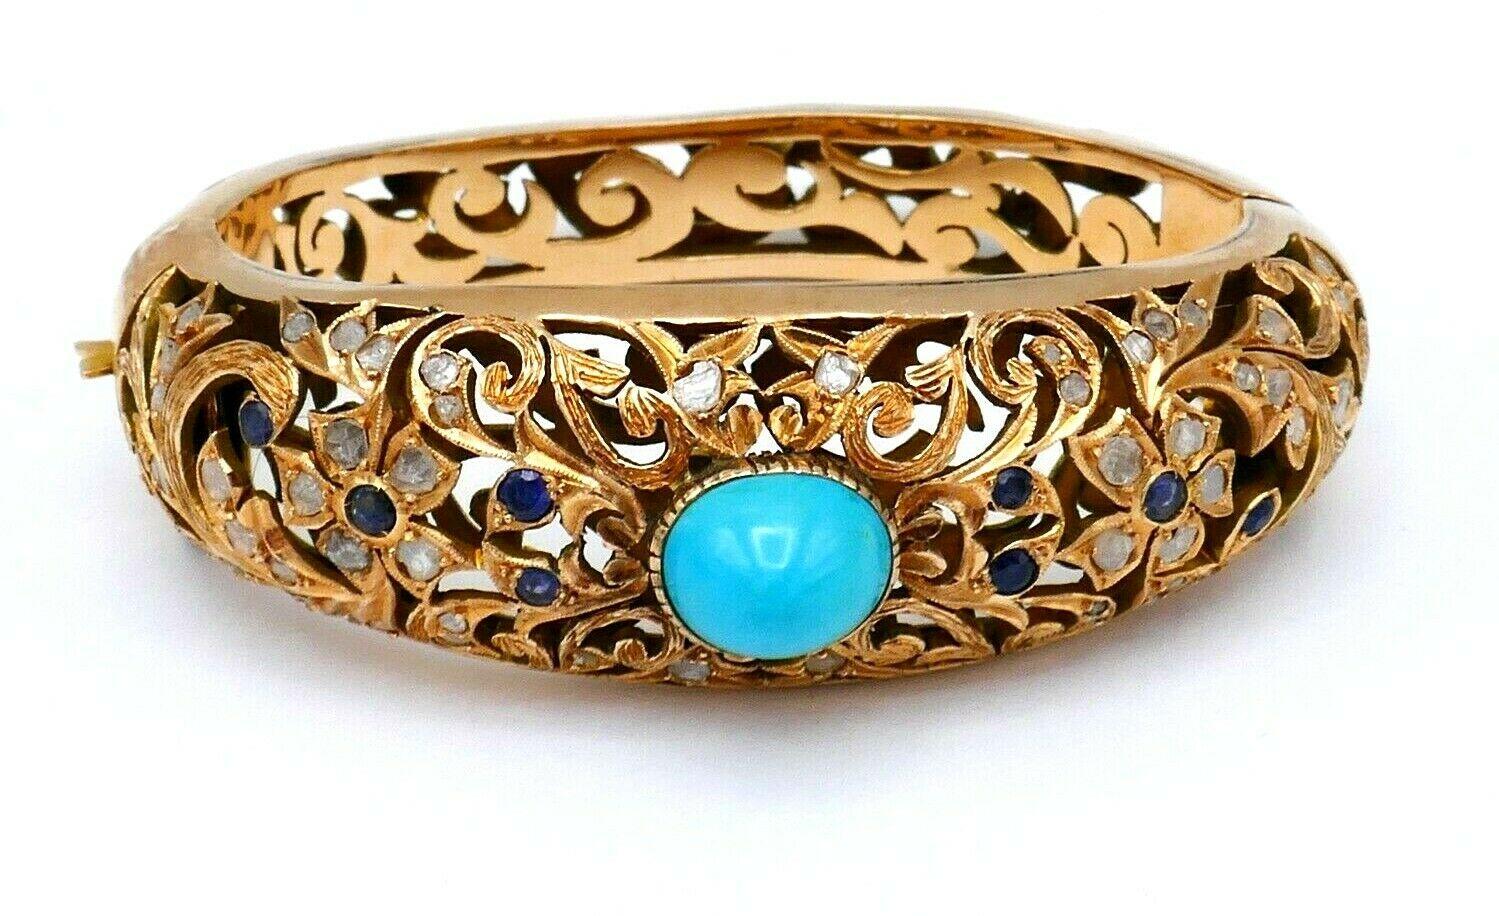 A gorgeous Antique 10k (tested) rose gold filigree bangle bracelet. Features turquoise, rose cut diamond and sapphire. 
Measurements: inner circumference - 6